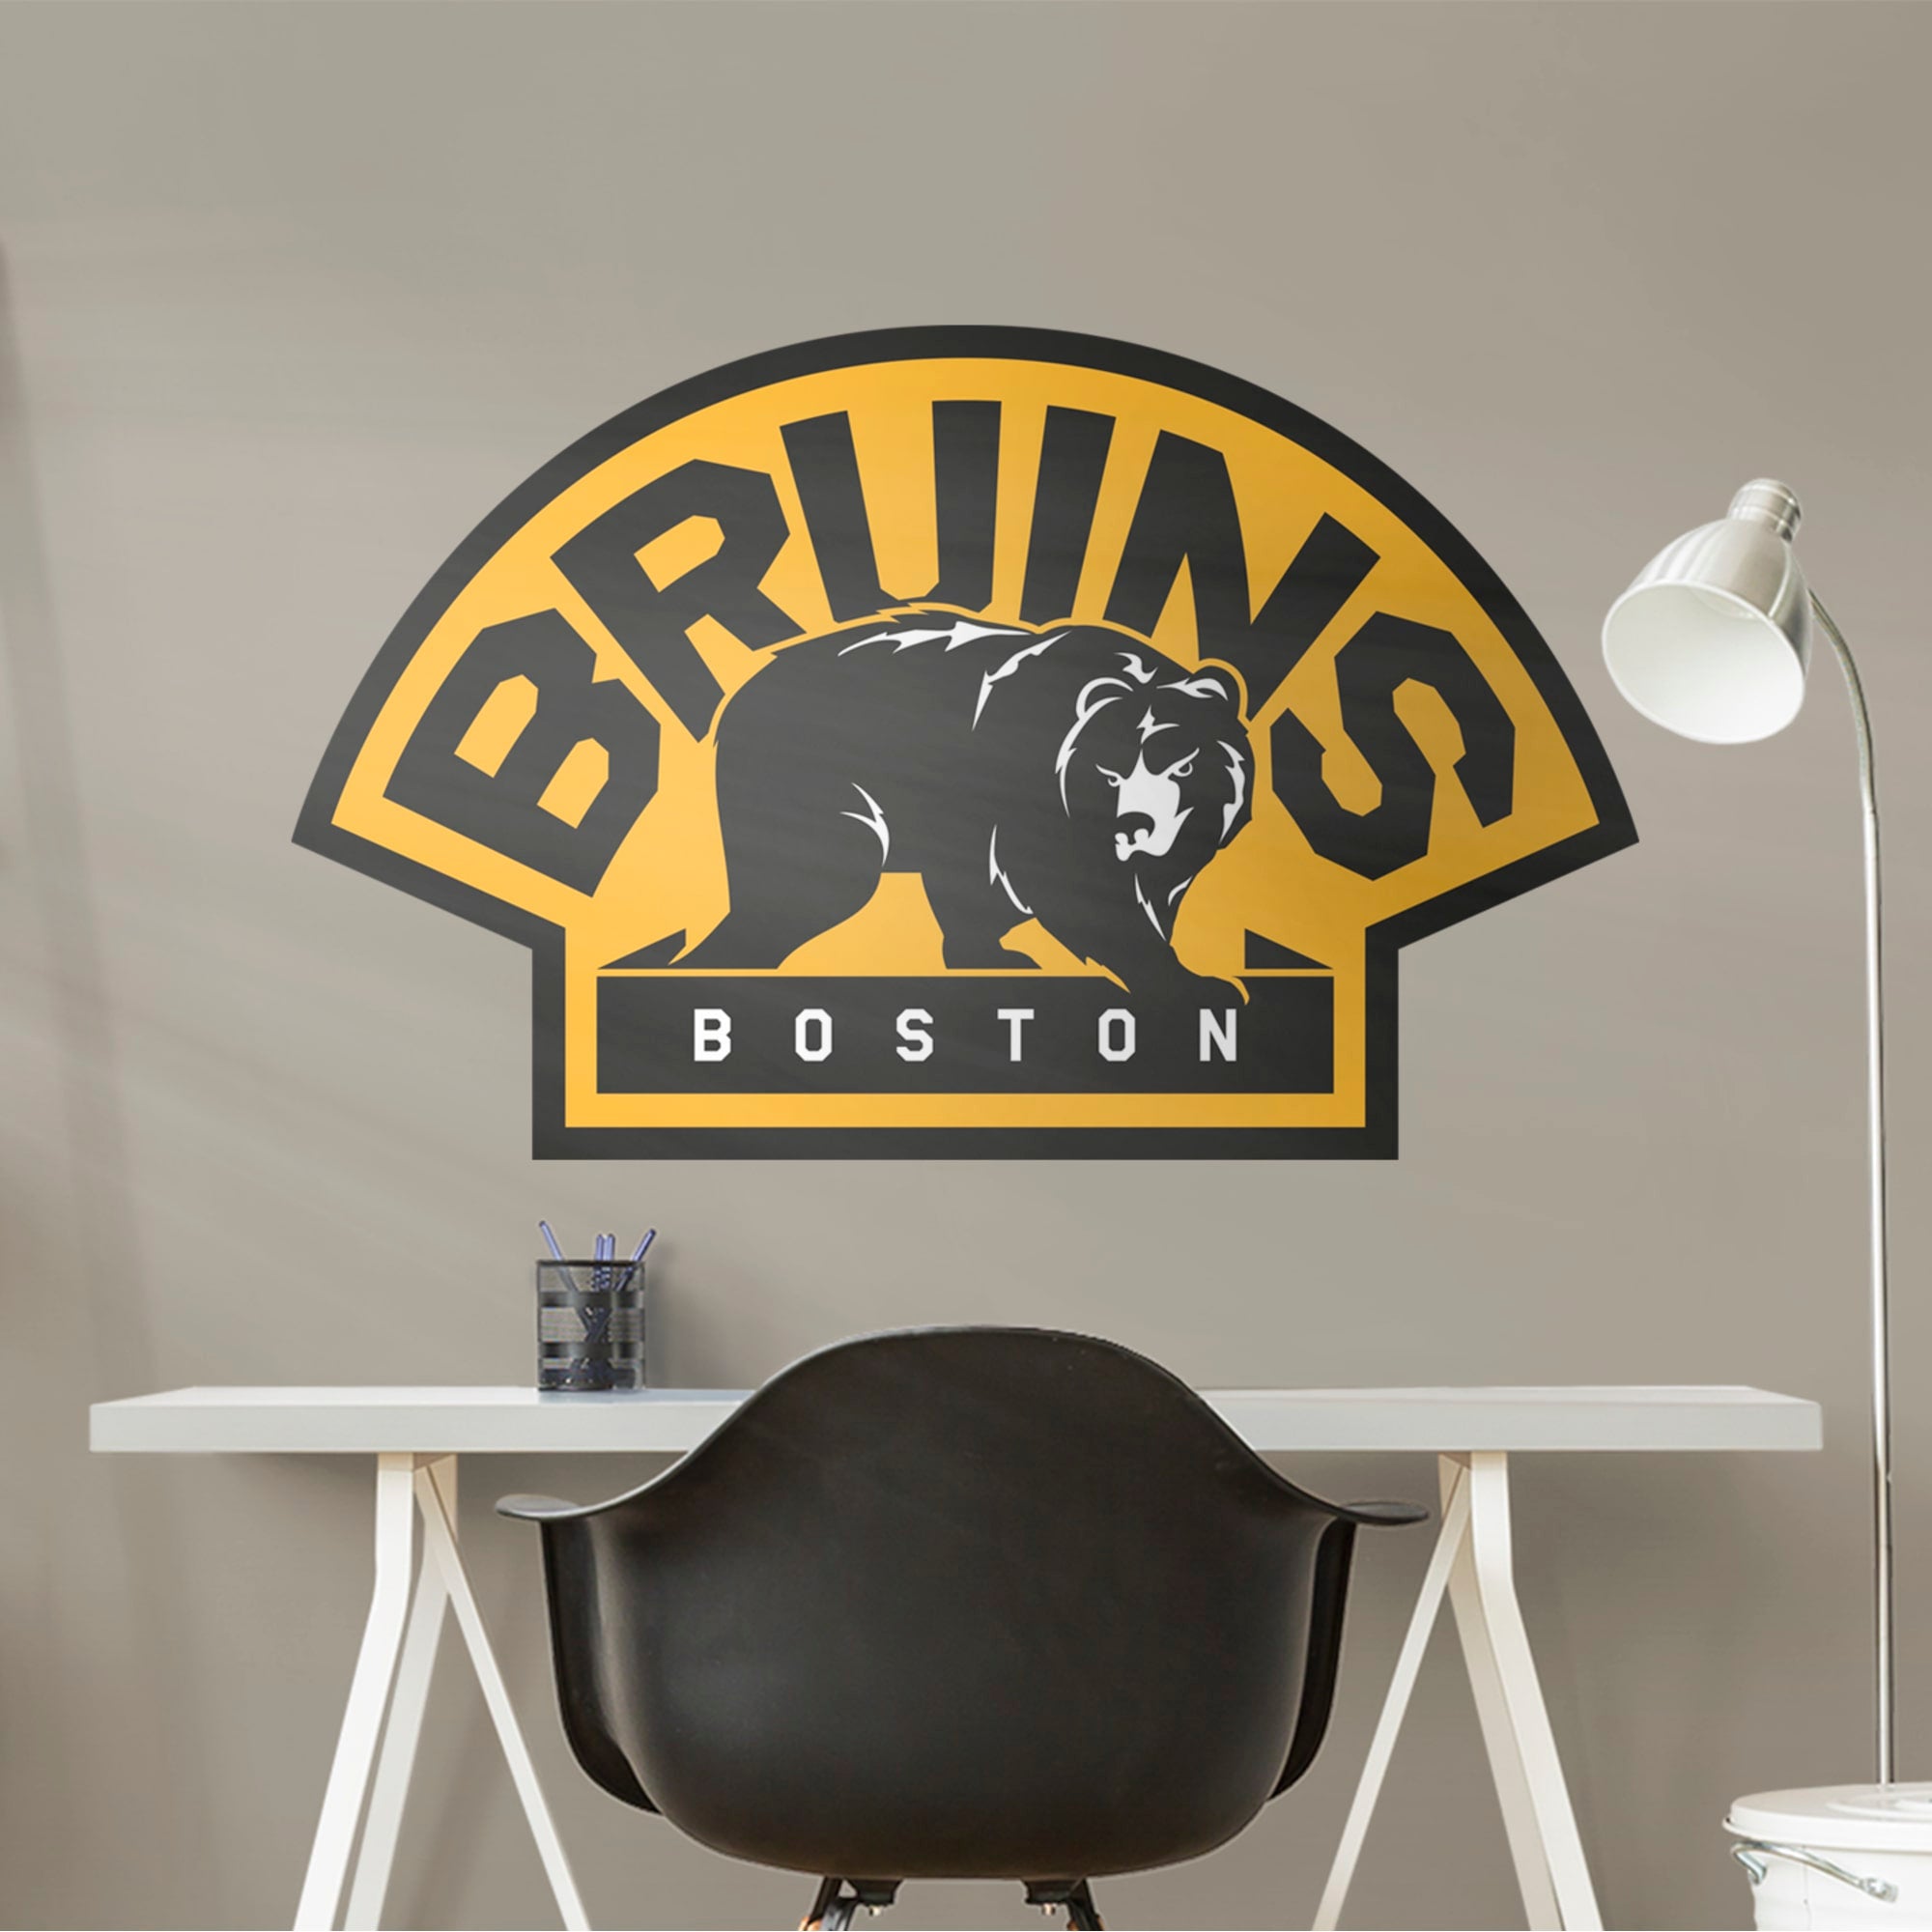 Boston Bruins: Alternate Logo - Officially Licensed NHL Removable Wall Decal 51.0"W x 32.0"H by Fathead | Vinyl